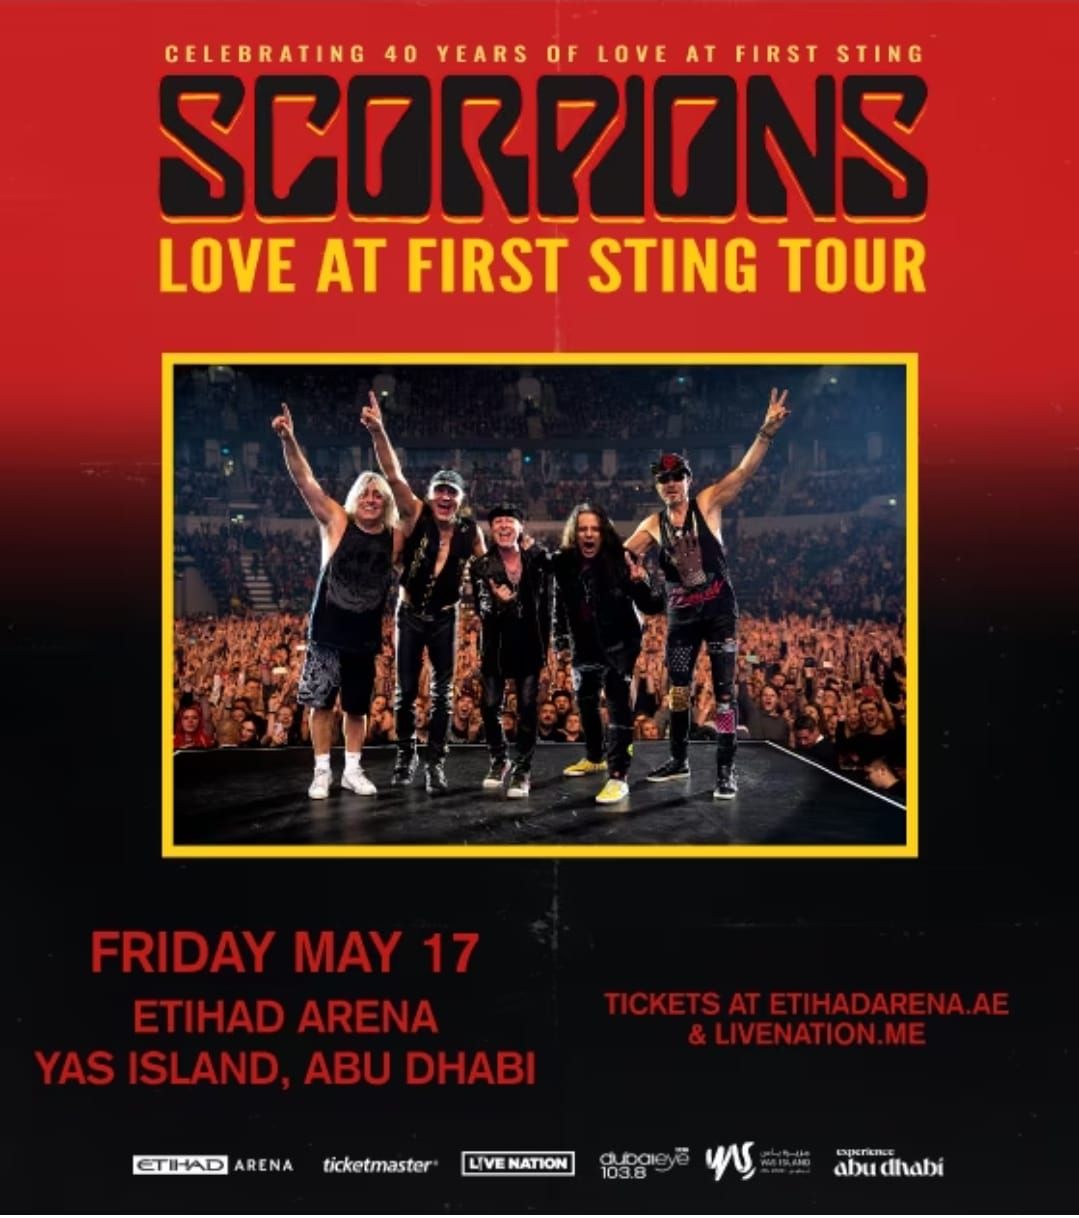 Scorpions - Love at First Sting Tour